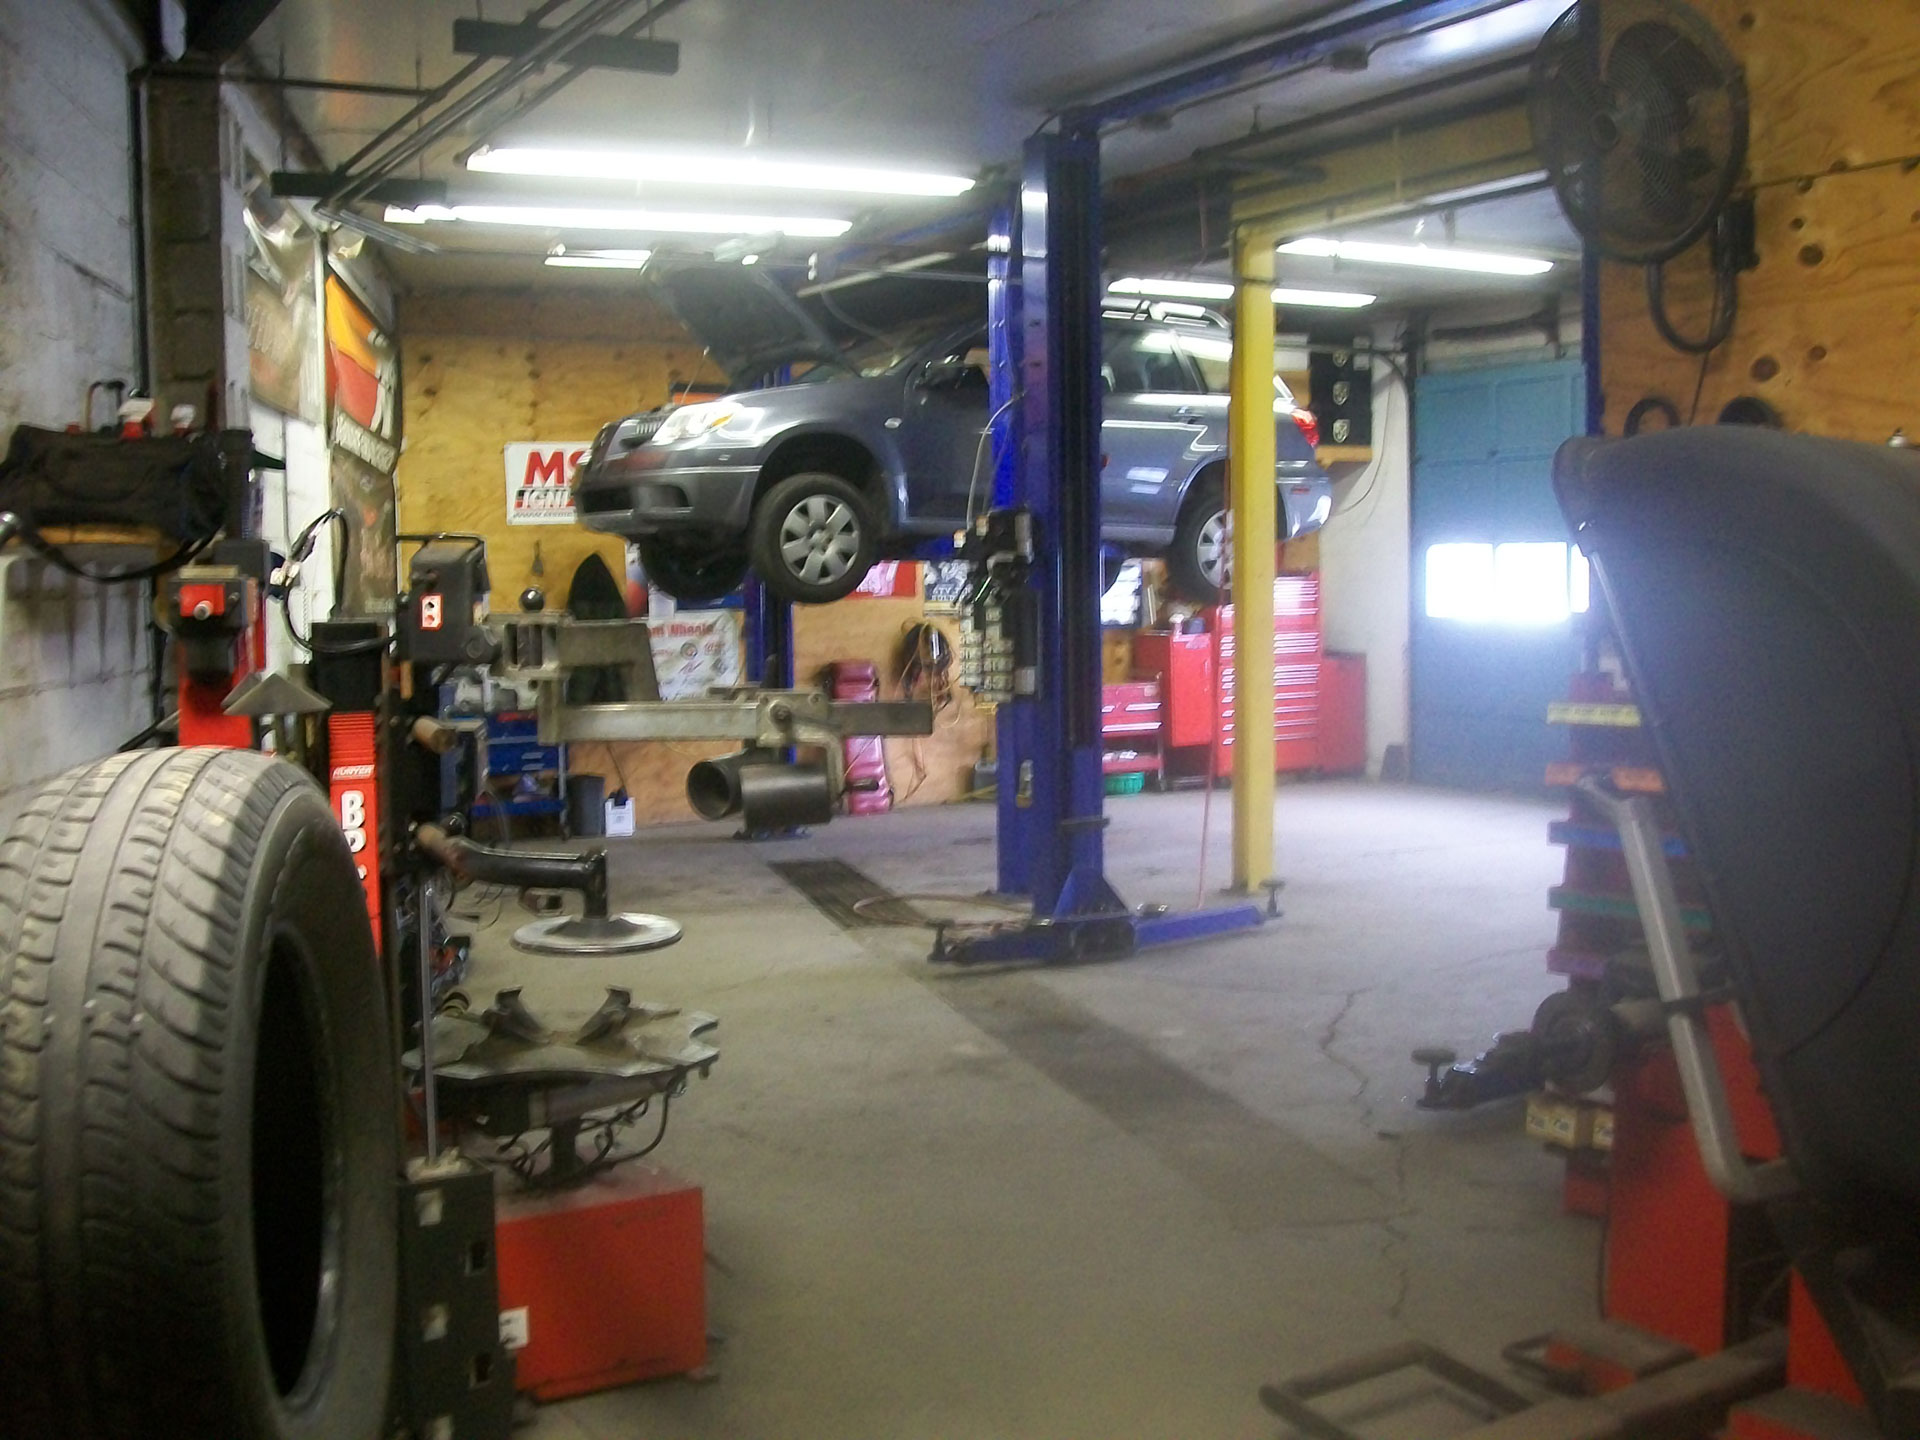 Your Reliable Local Auto Repair Shop